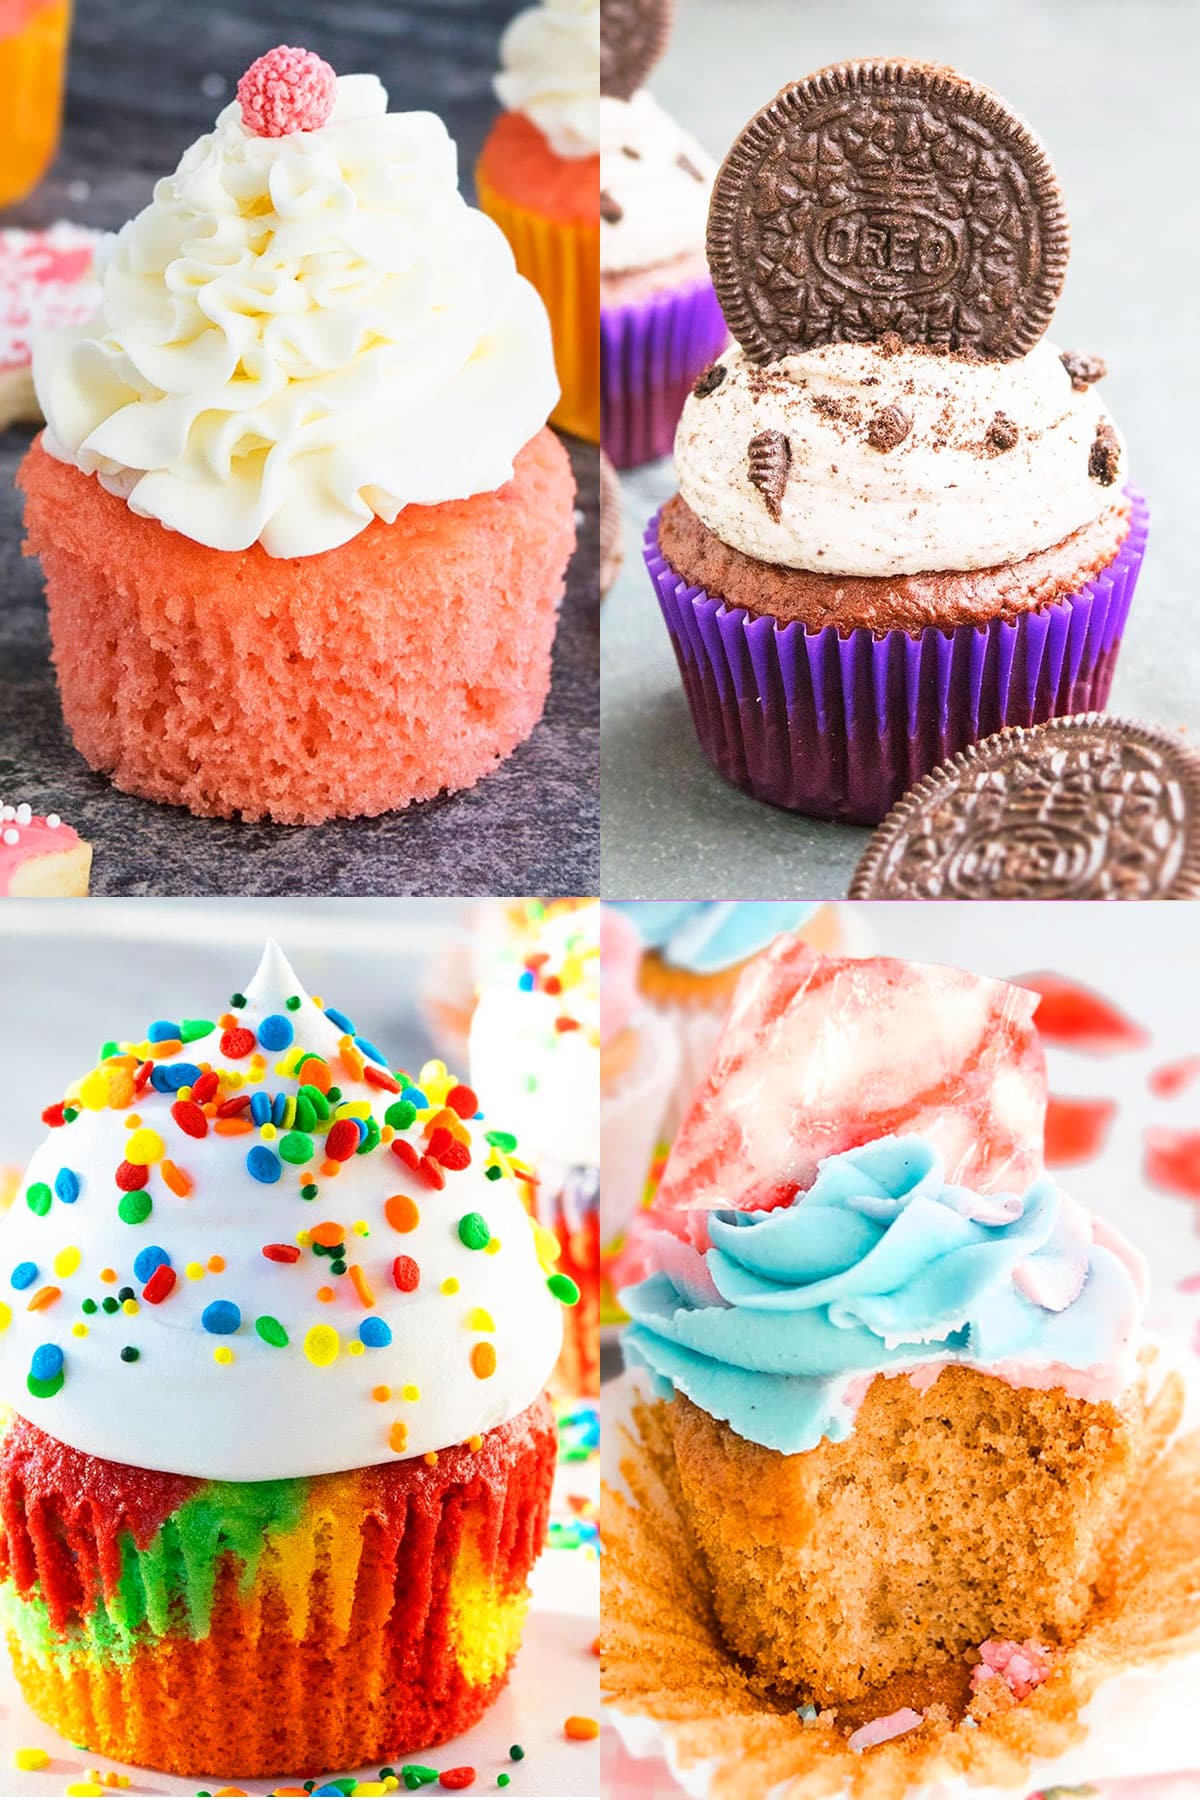 Collage Image With Many Easy Cake Mix Cupcake Recipes 